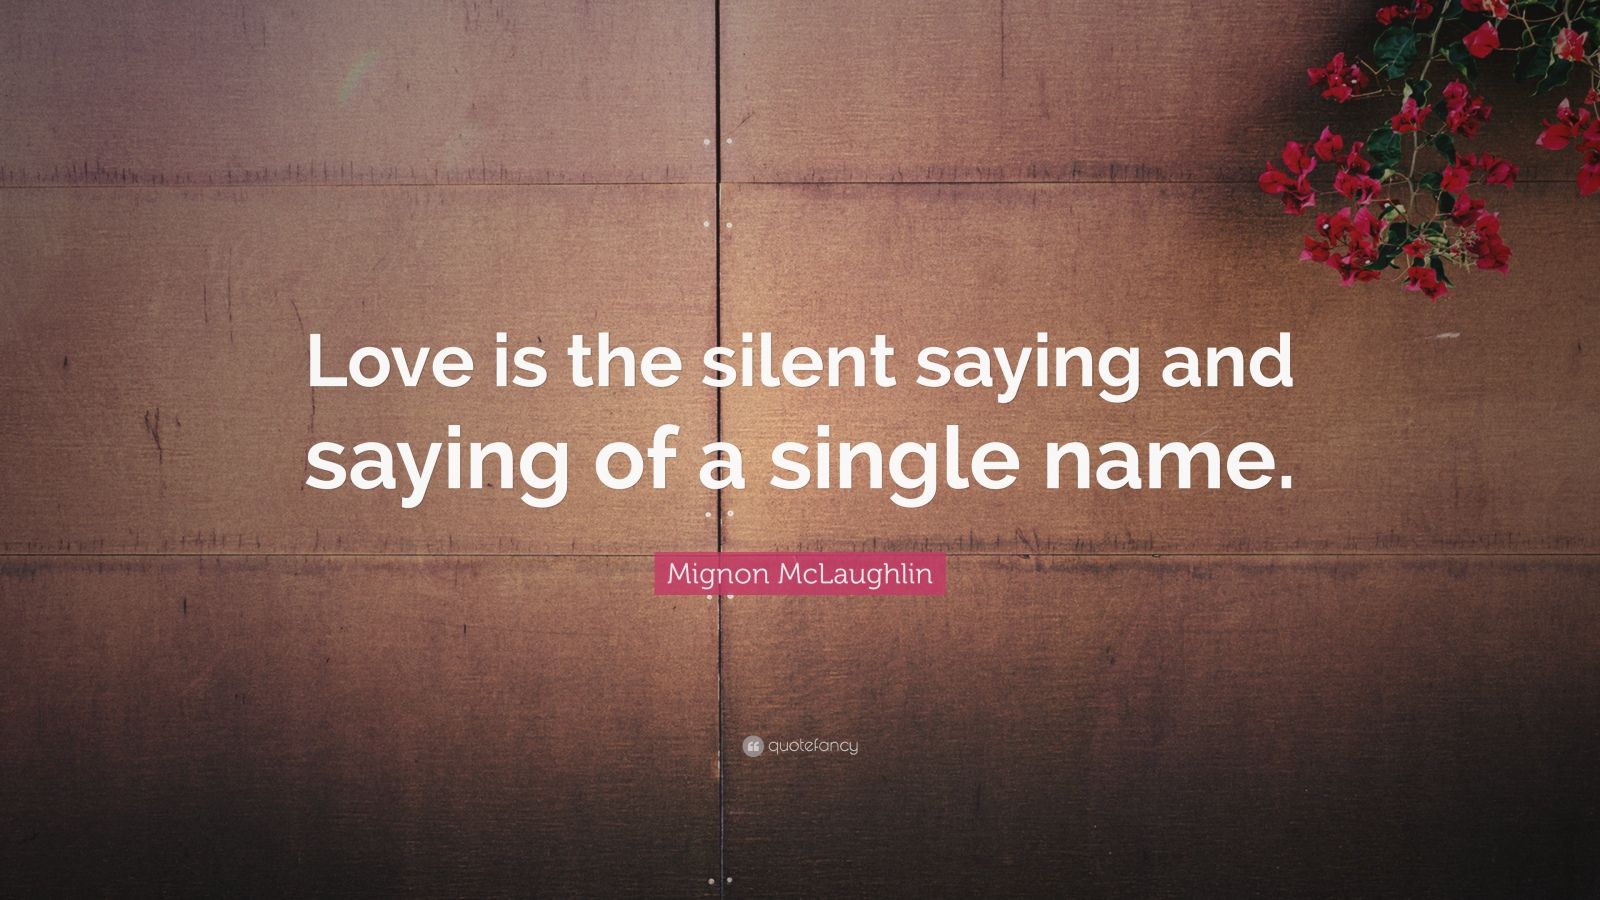 Mignon McLaughlin Quote: "Love is the silent saying and ...